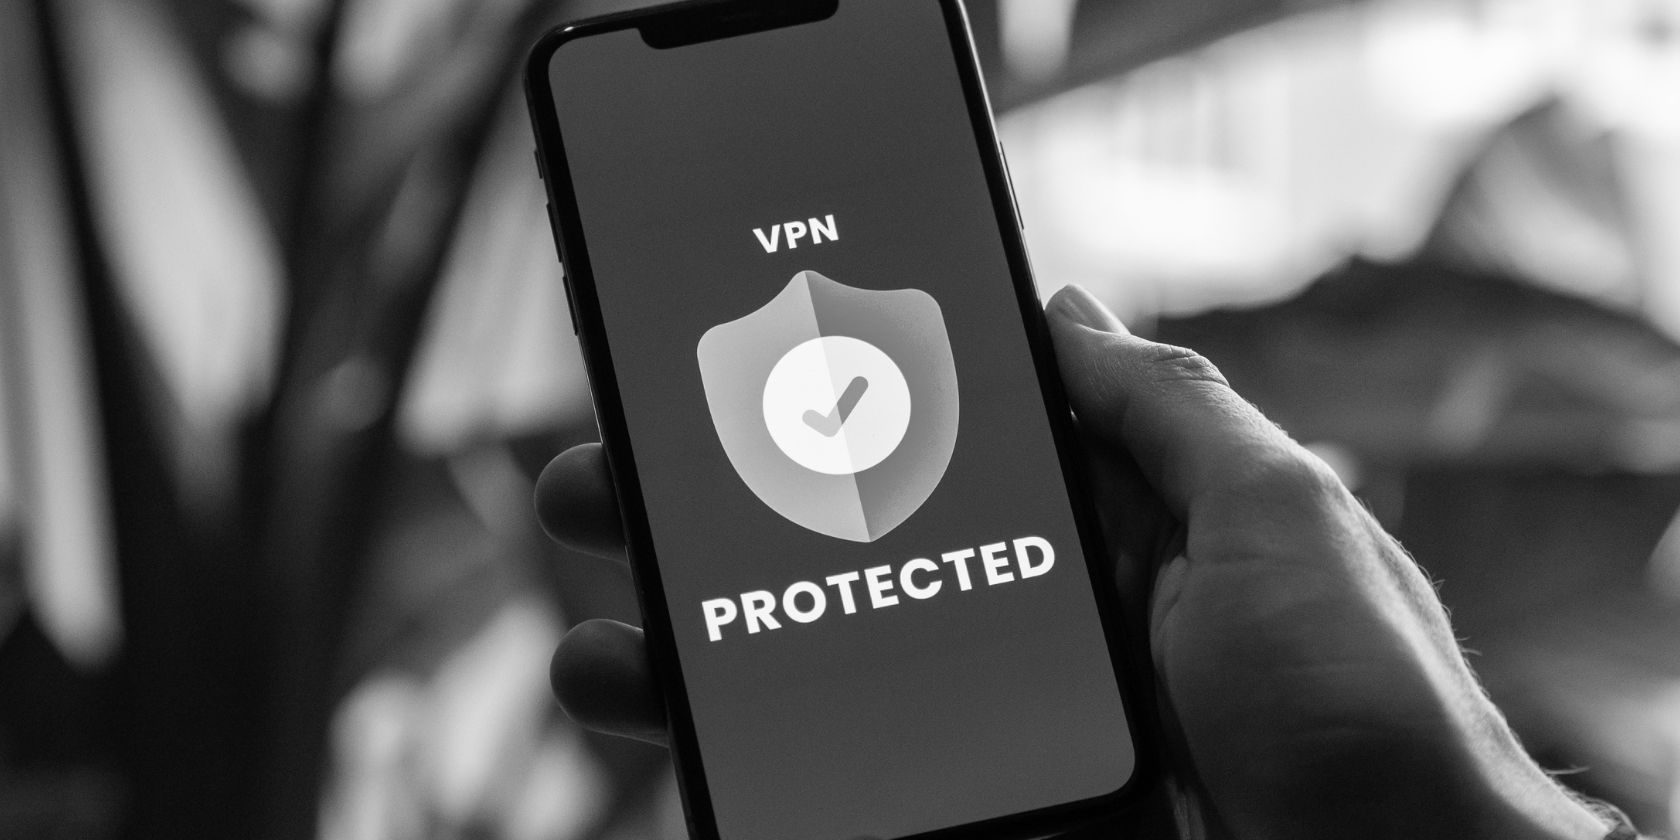 grayscale image of vpn active on smartphone